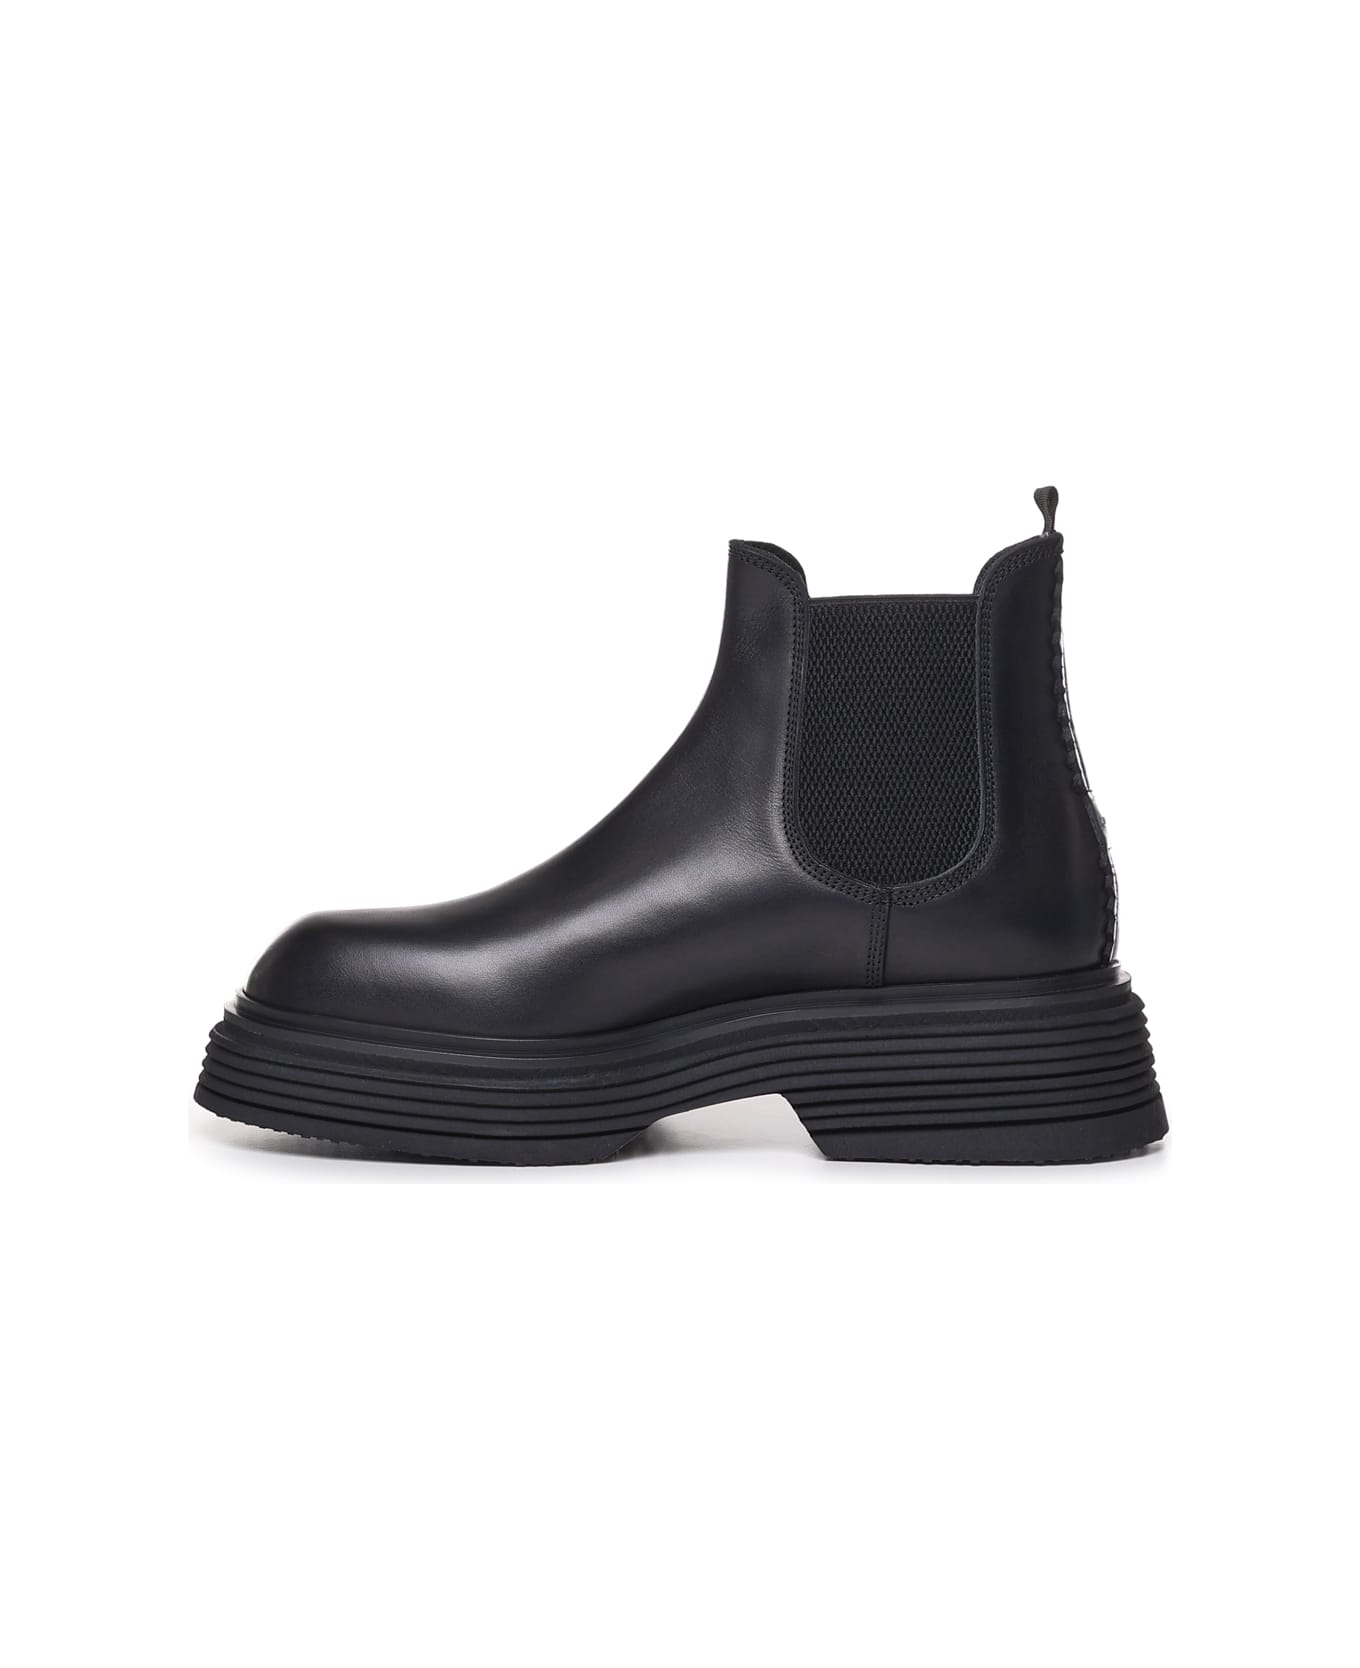 The Antipode Leather Beatles Boots - Black ブーツ